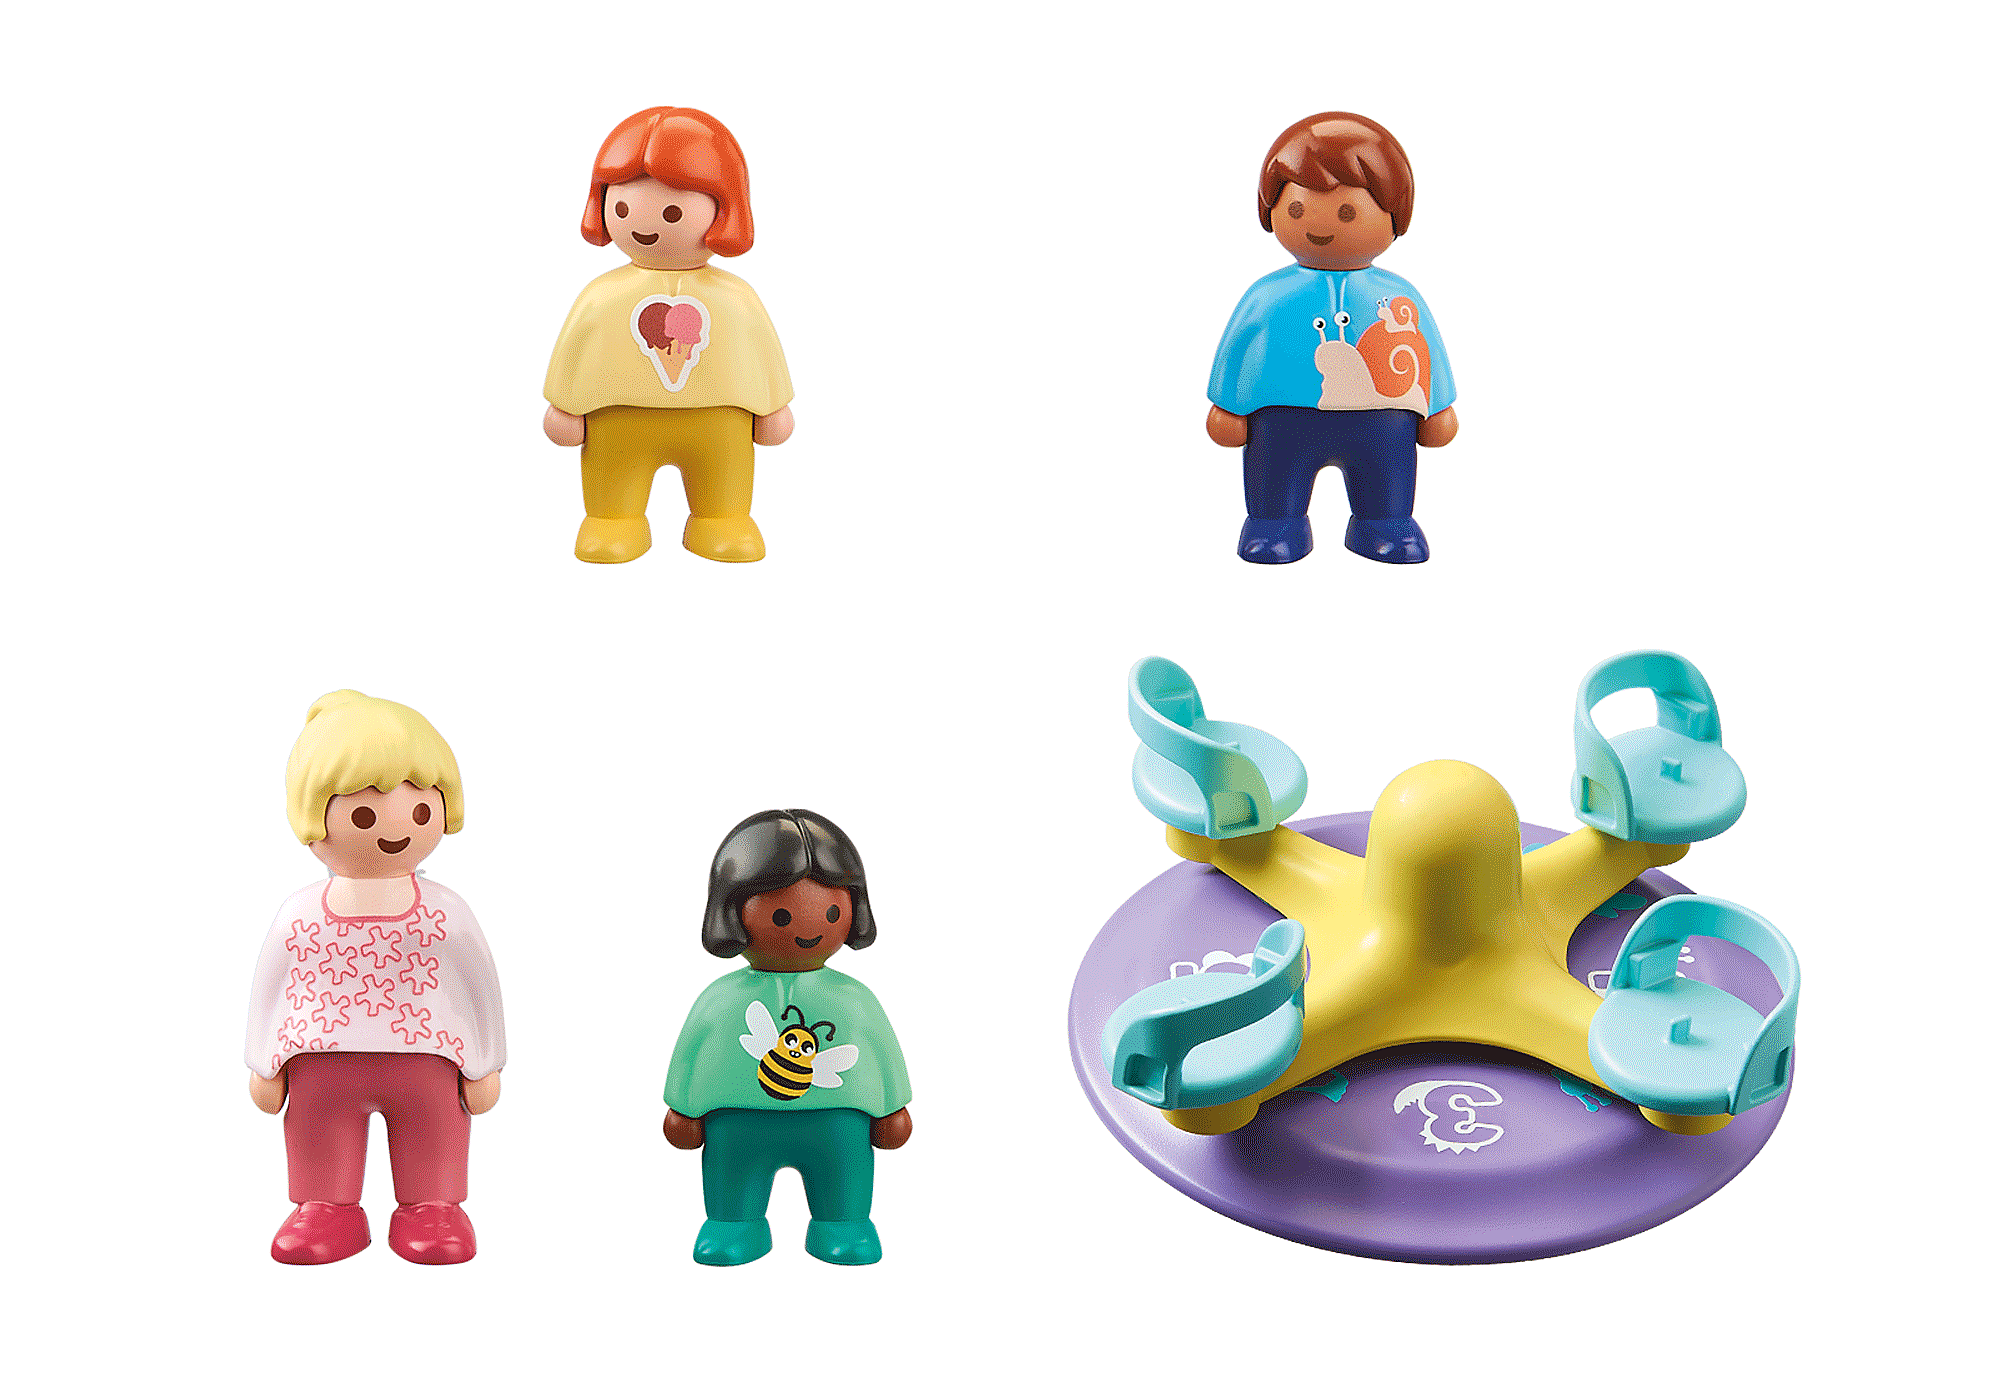 Playmobil for Toddlers & Preschoolers? Check out Playmobil 1.2.3!